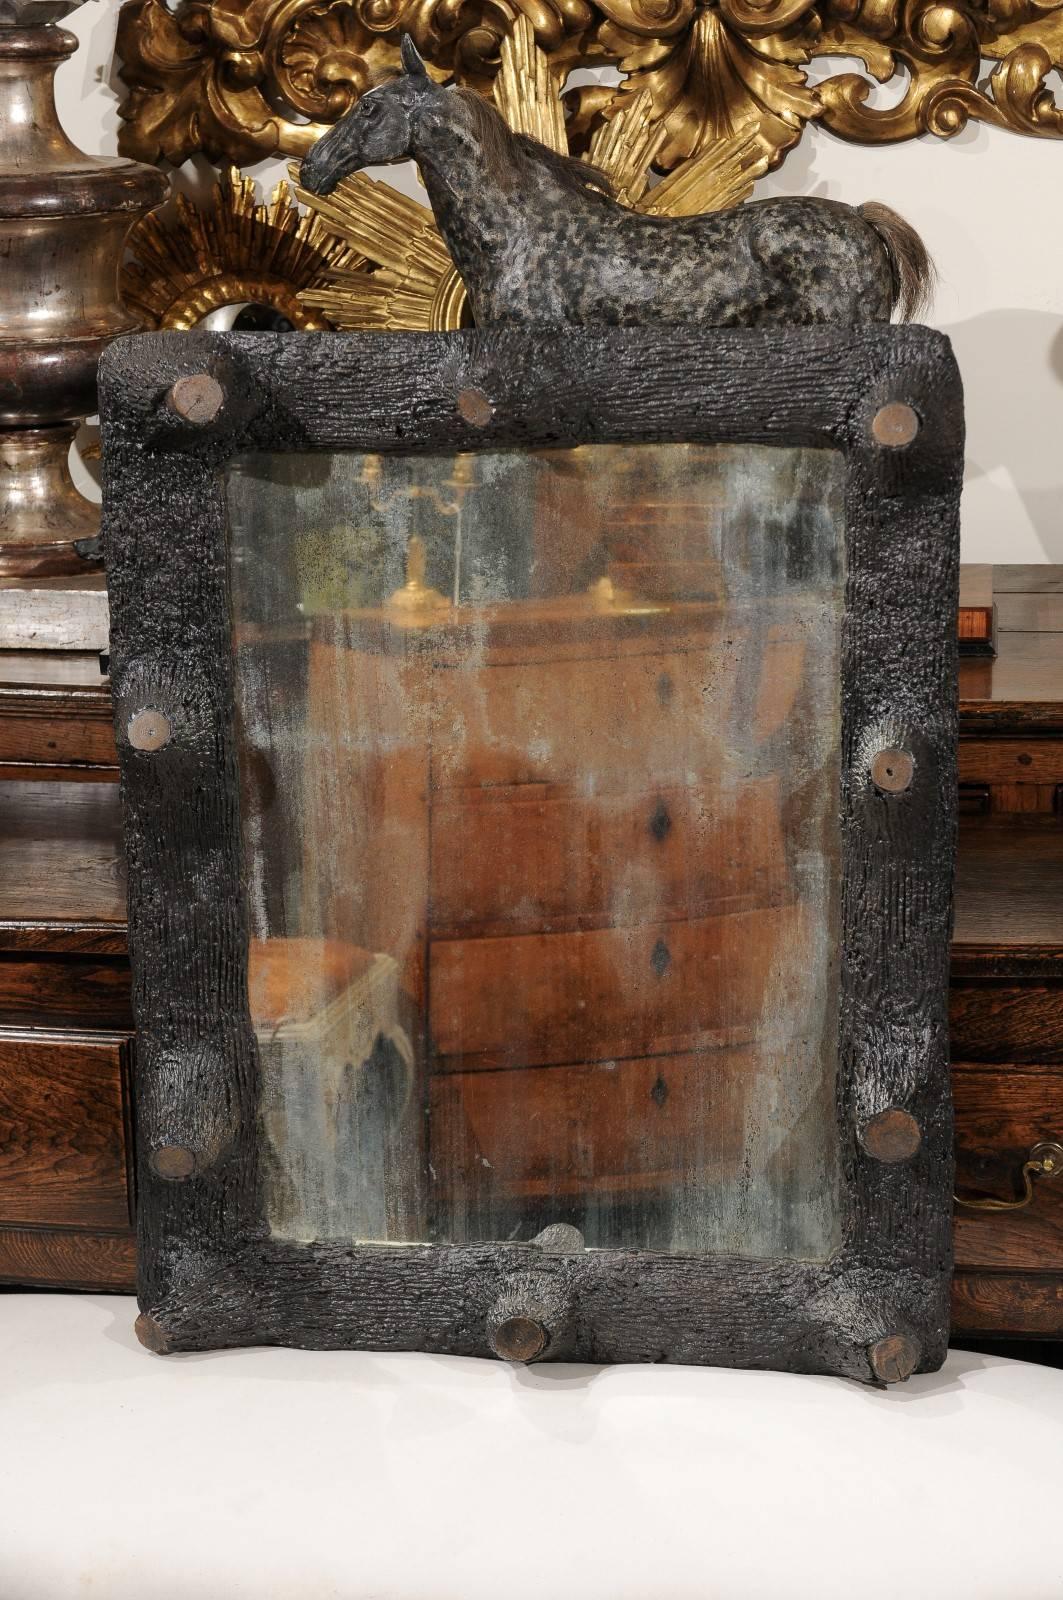 A French faux-bois mirror from the late 19th-early 20th century. This distressed glass mirror circa 1900 features a faux wood frame with truncated branches all around. Faux-bois, from the French term for false wood, refers to the artistic imitation